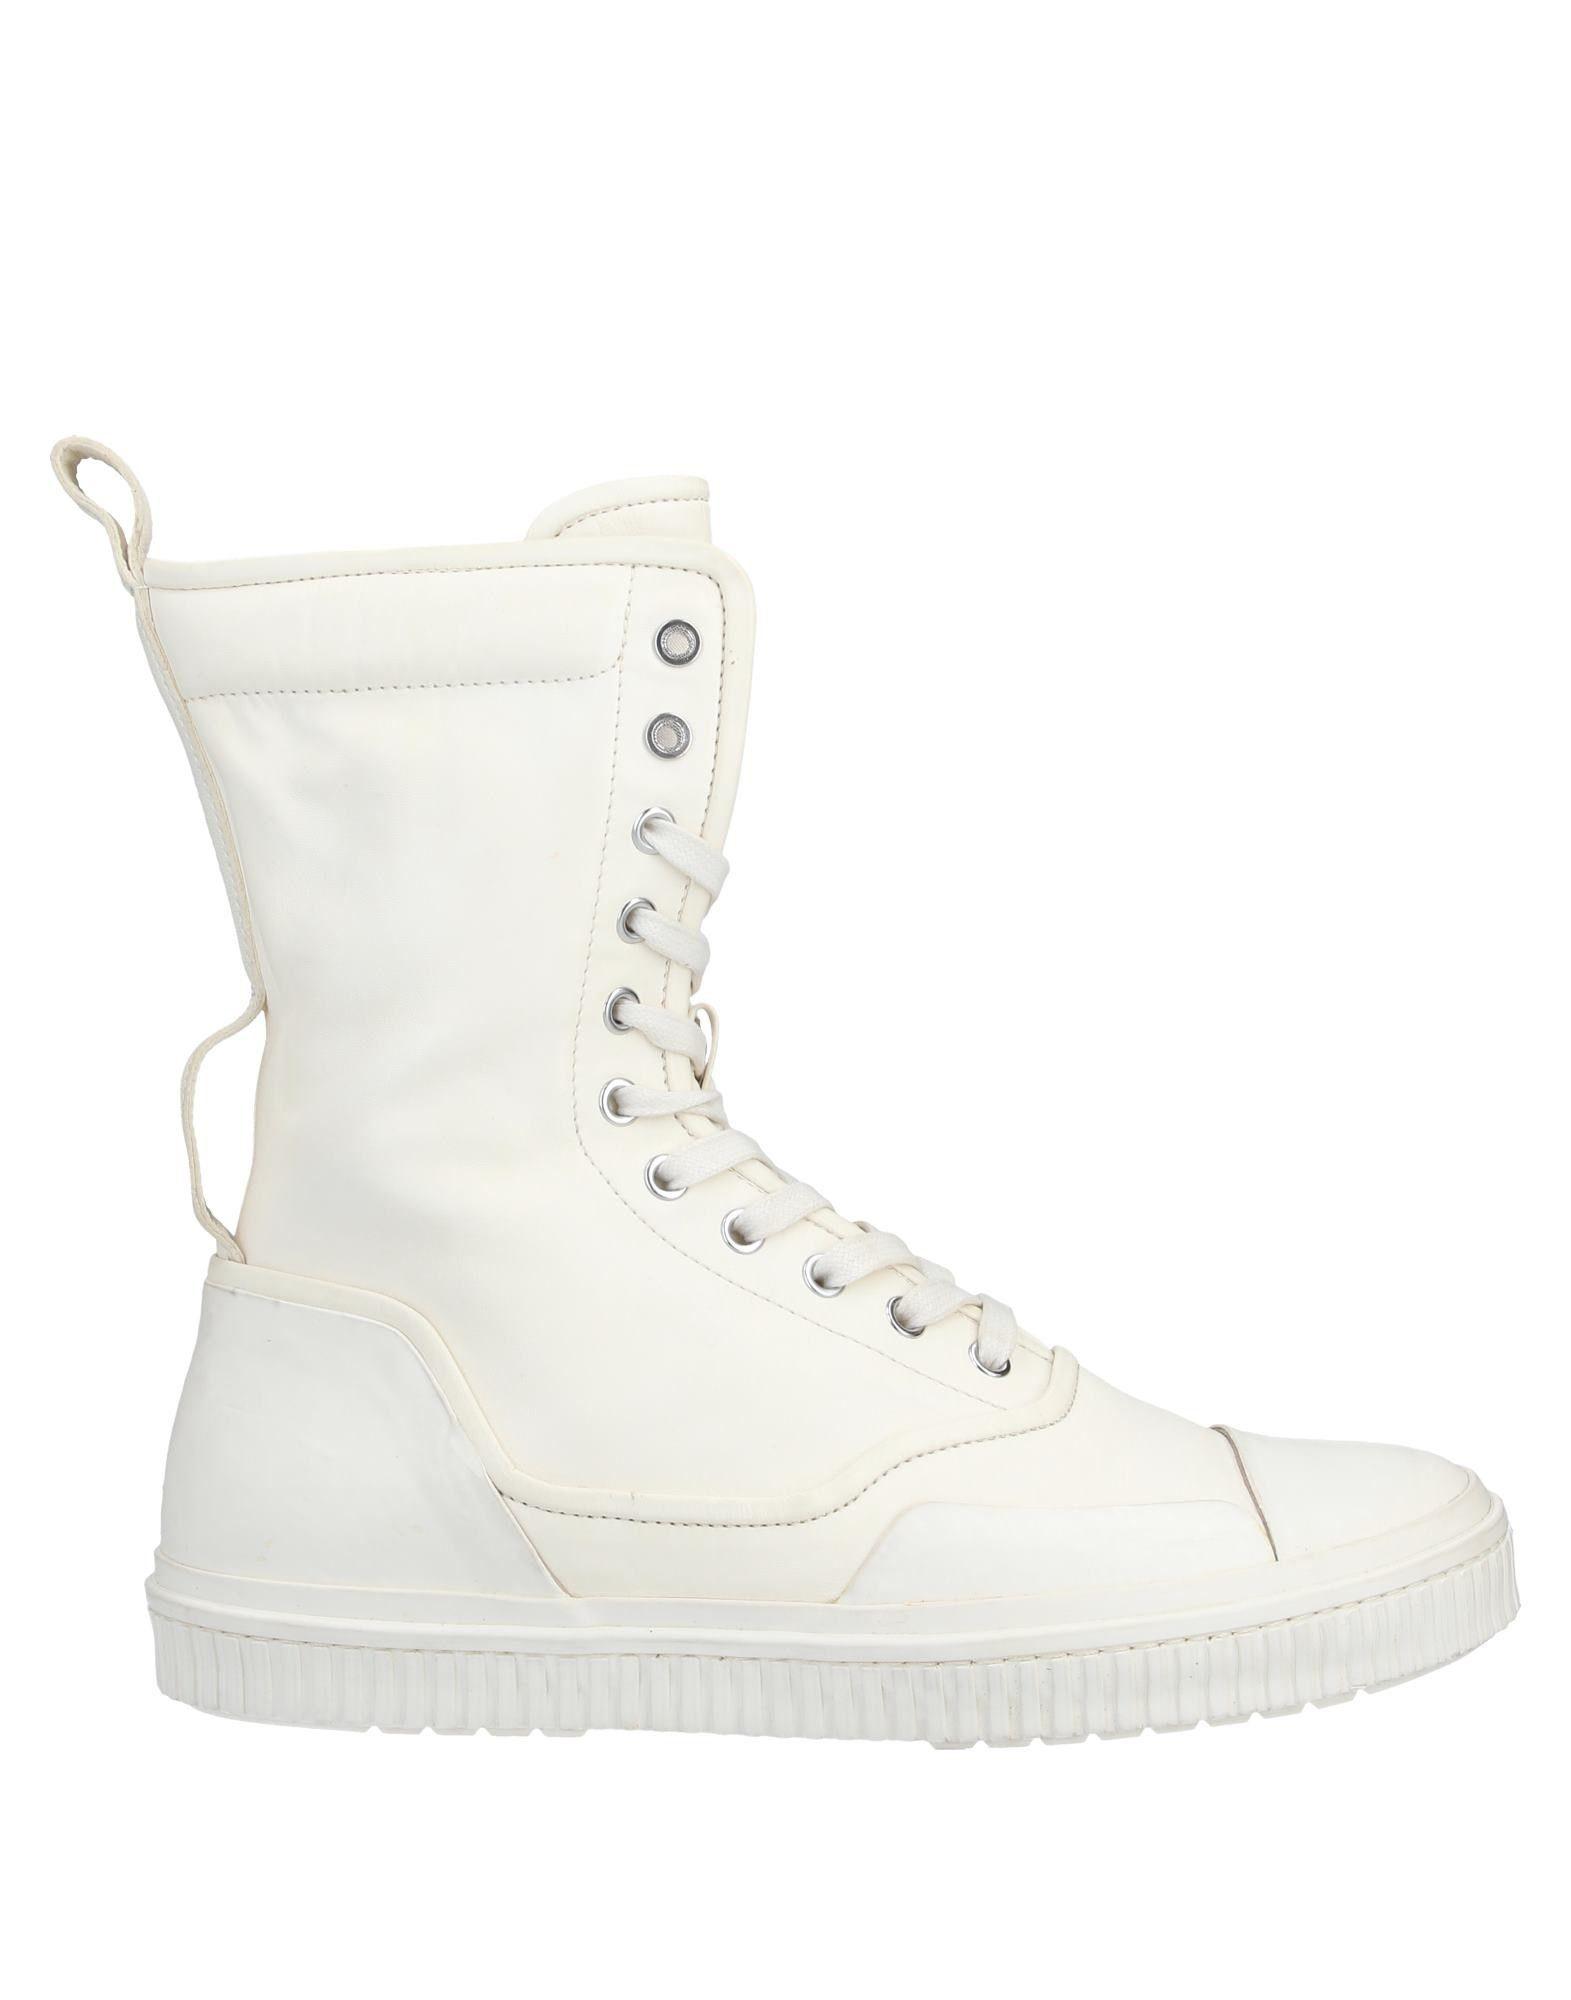 BOTH Paris Ankle Boots in White for Men - Lyst